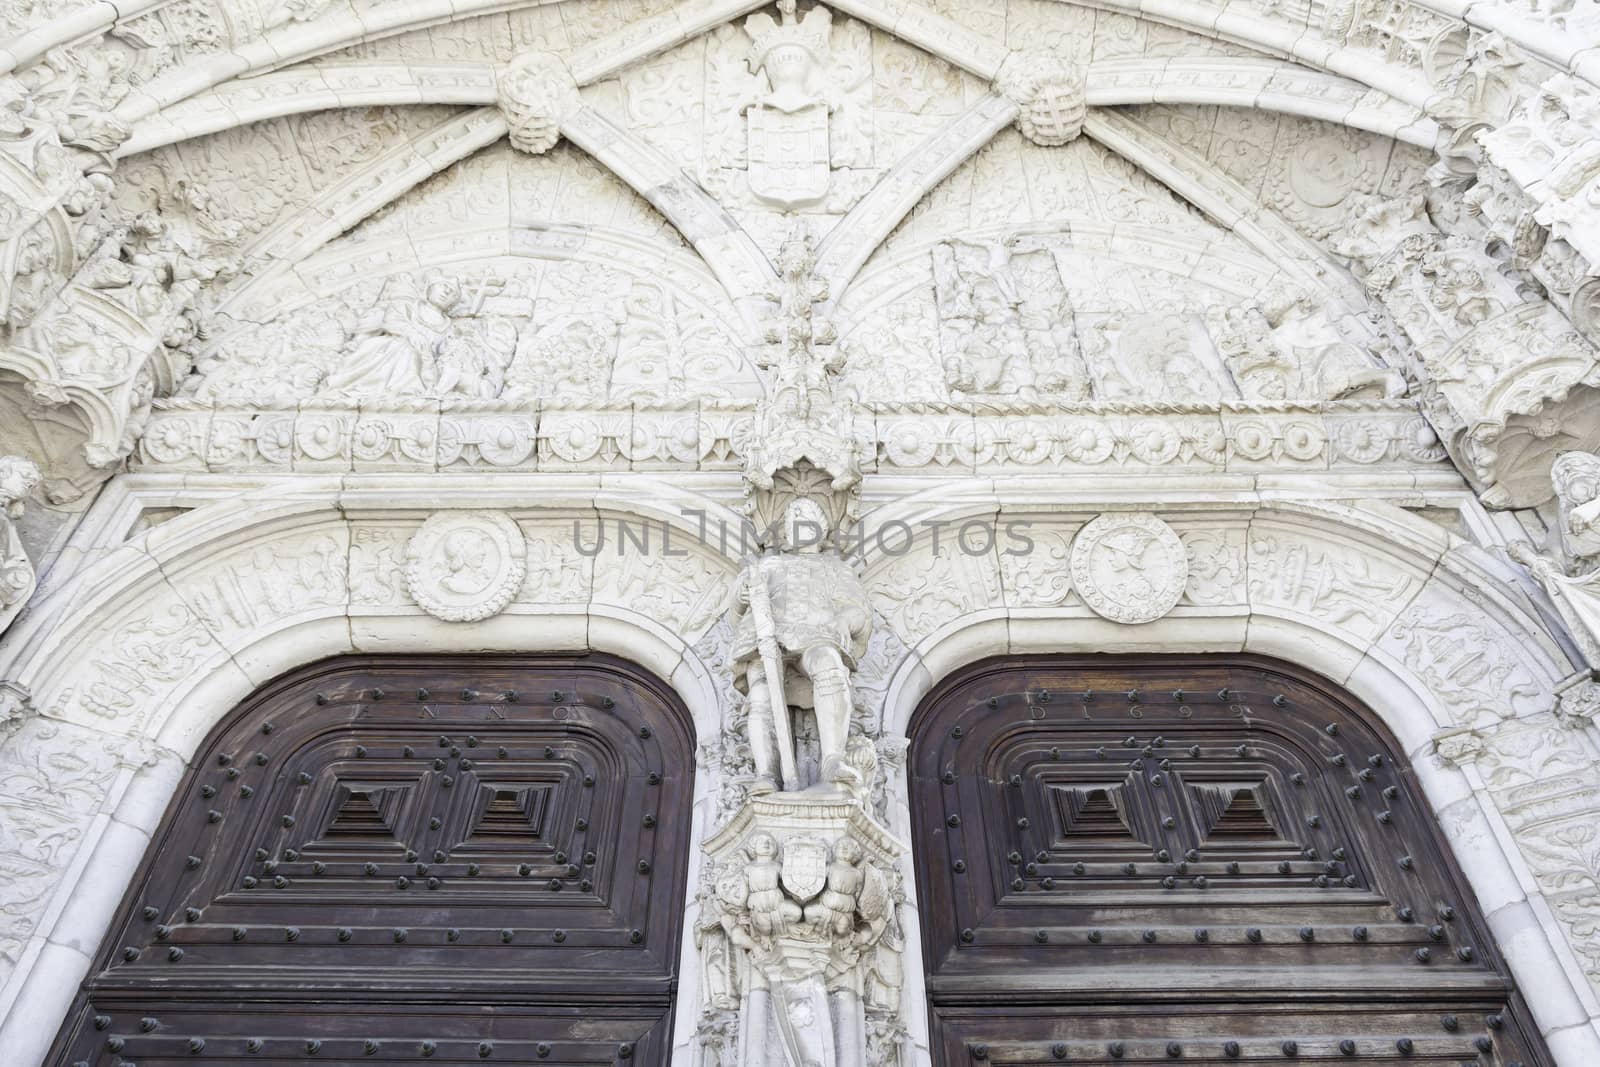 Facade of Jeronimos in Lisbon, detail of old building in Portugal, Manueline architecture